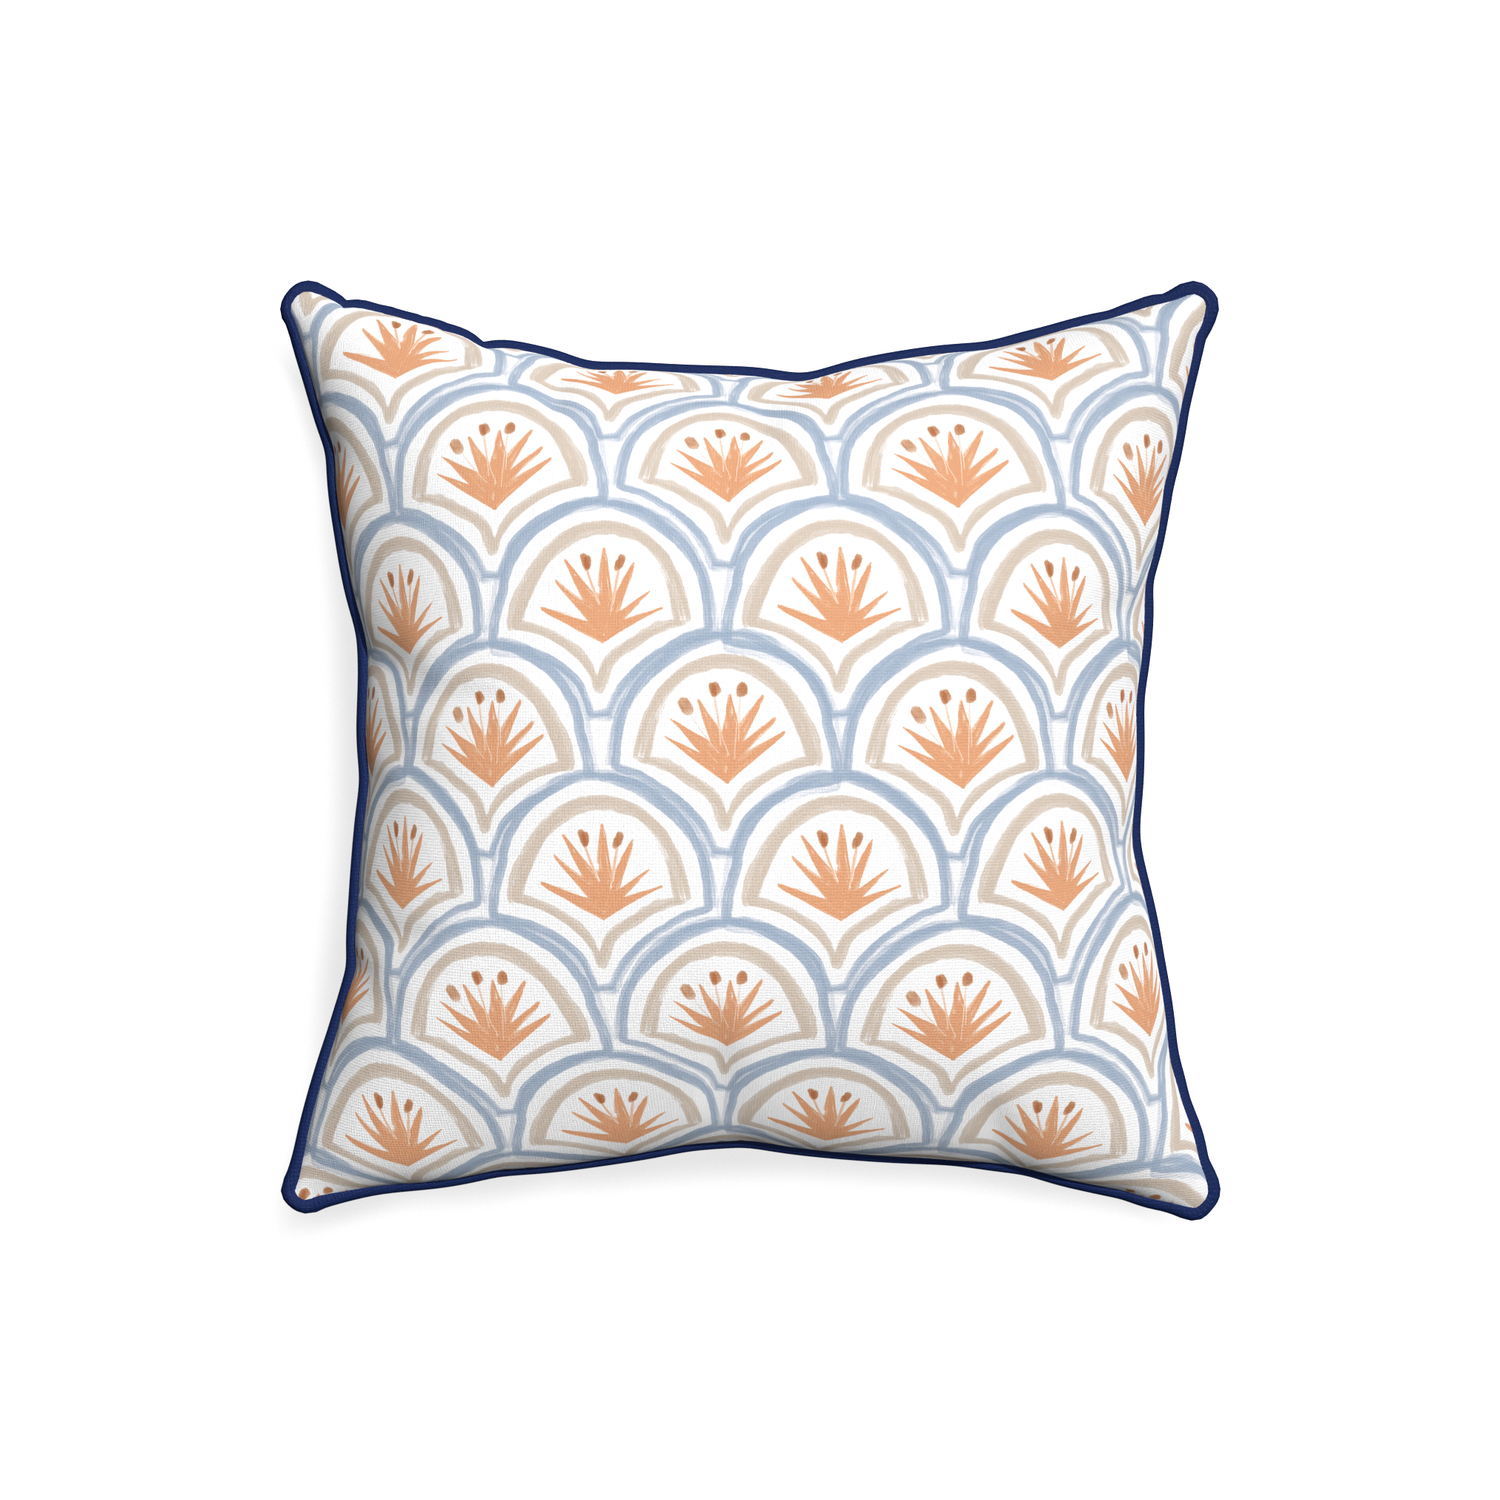 20-square thatcher apricot custom art deco palm patternpillow with midnight piping on white background